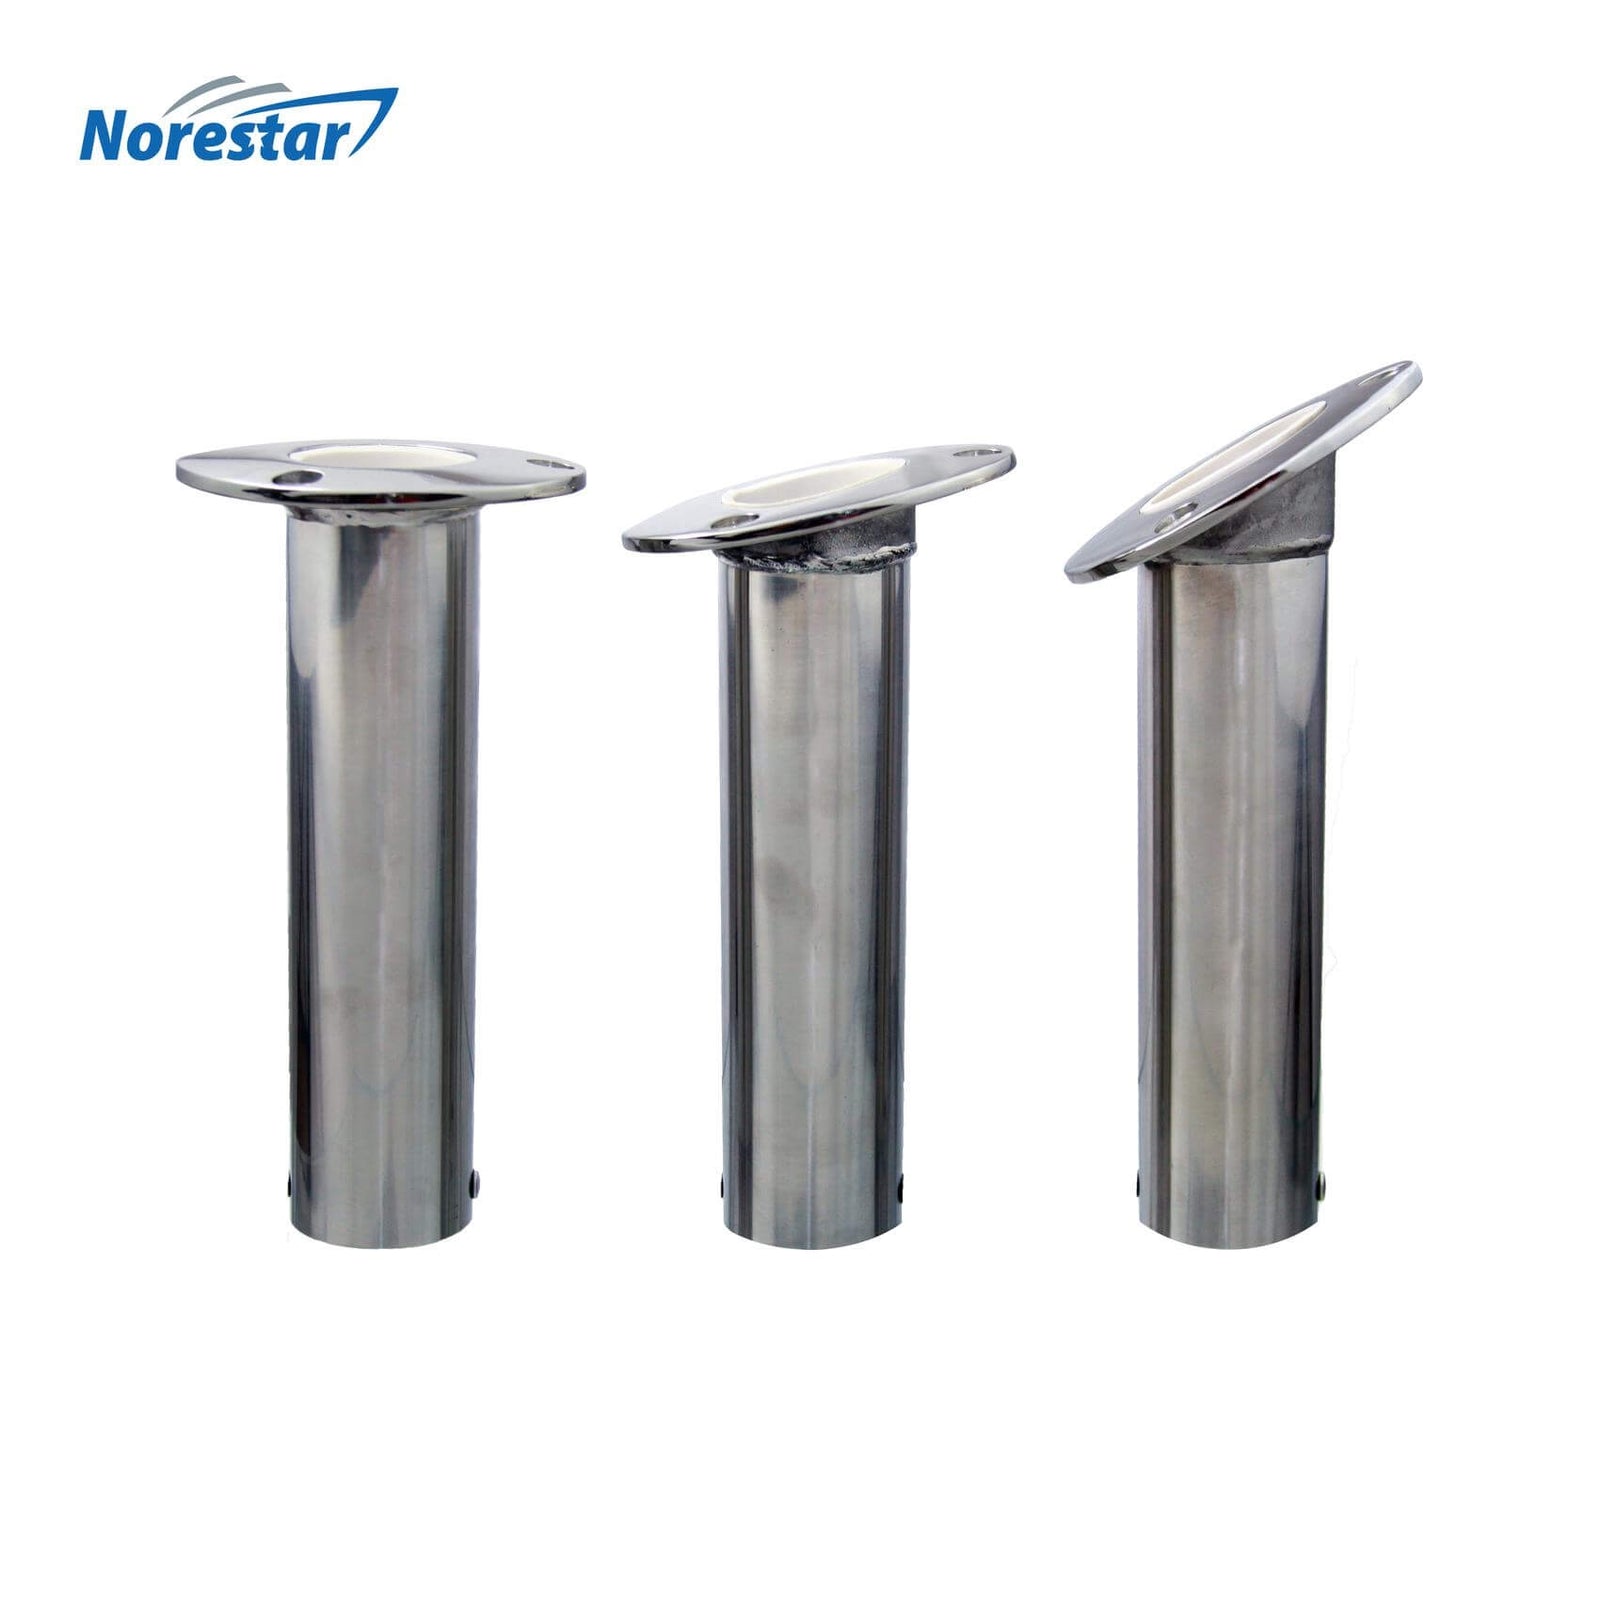 Flush Mounted Stainless Steel Rod Holders, Angle Comparison